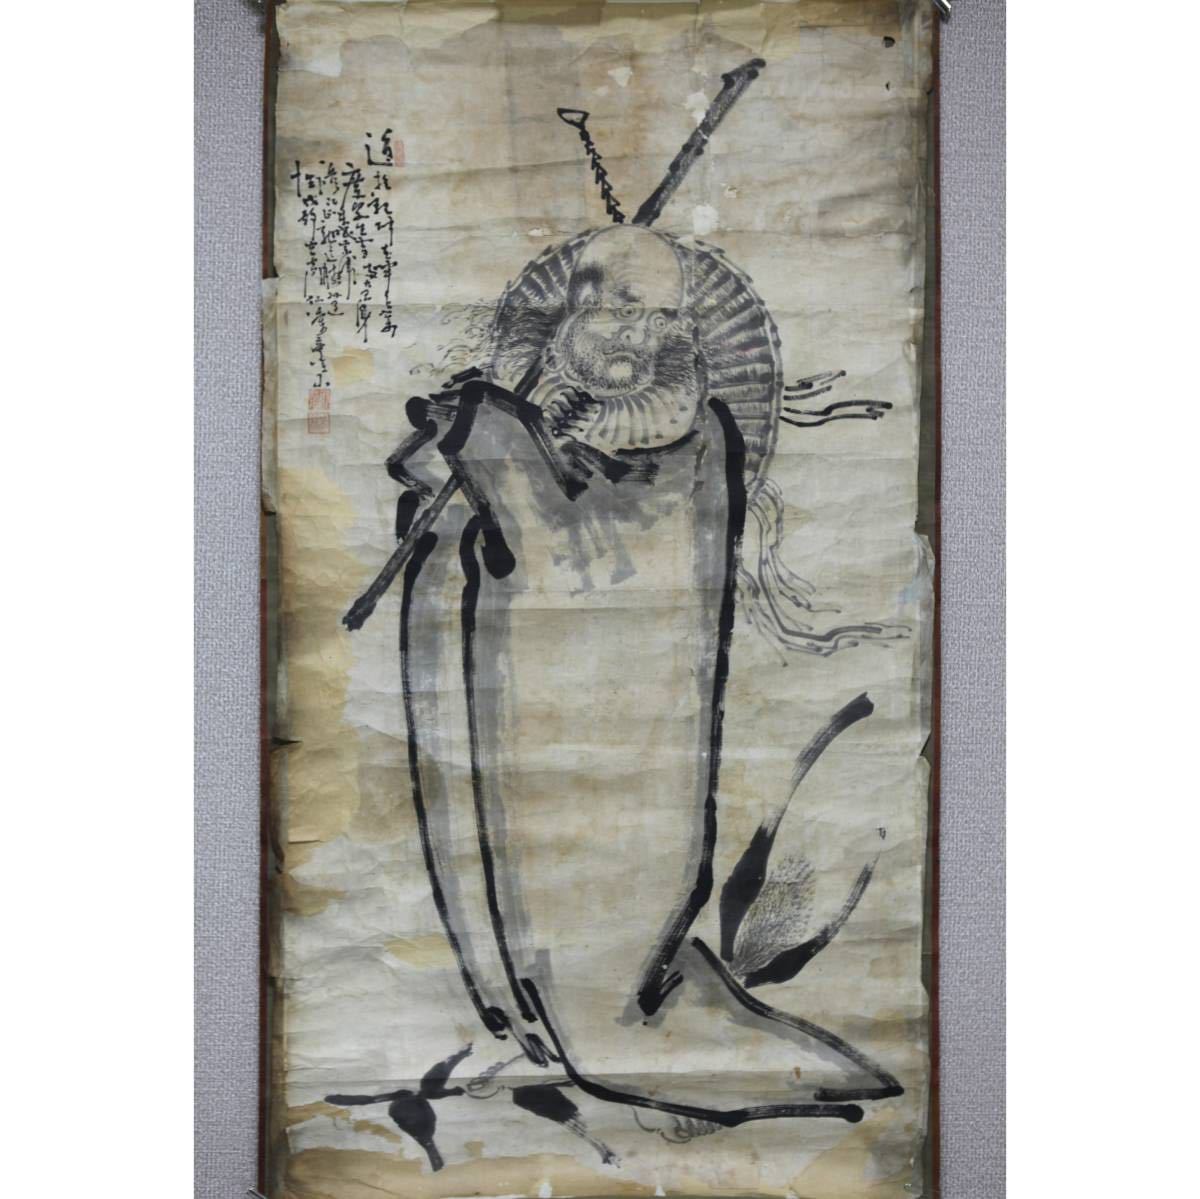 [Authentic work] [Windmill] Ming dynasty 莆 County Lin Ying Daruma ◎ Handwritten paperback ◎ Ming dynasty Fujian 莆 People of the fields Government and military personnel Guiro 《莆 Tian County Zhi》 Chinese painting, artwork, painting, Ink painting